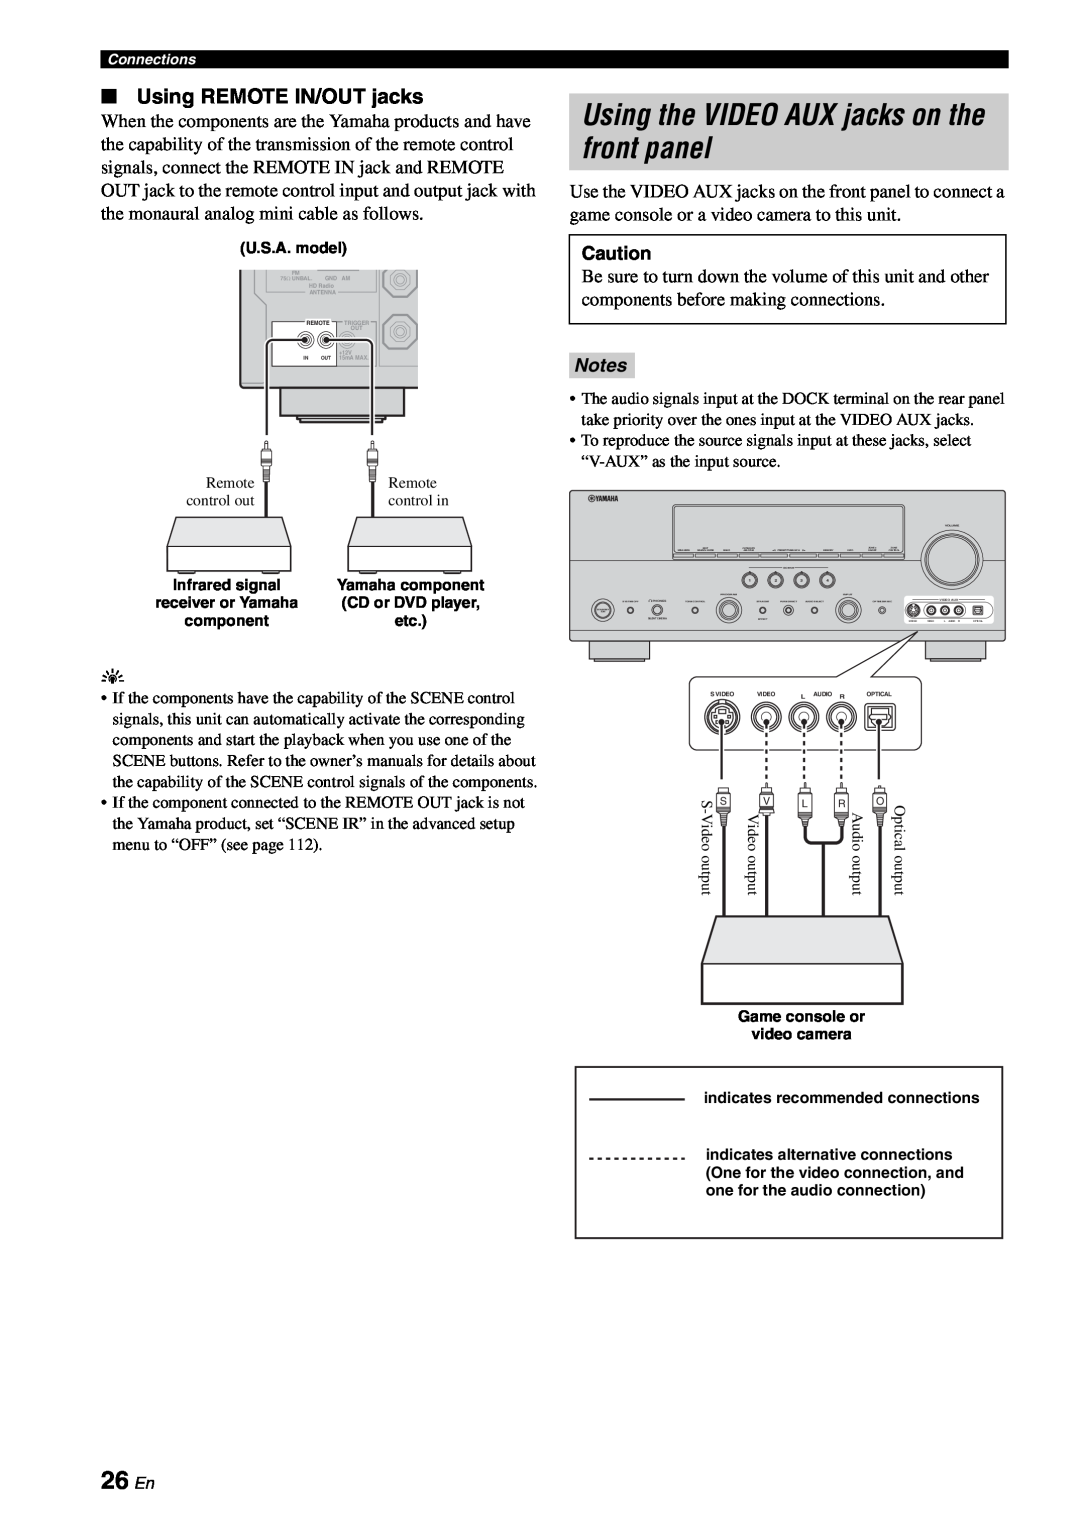 Yamaha RX-V863 owner manual Using the VIDEO AUX jacks on the front panel, 26 En, Using REMOTE IN/OUT jacks, Notes 